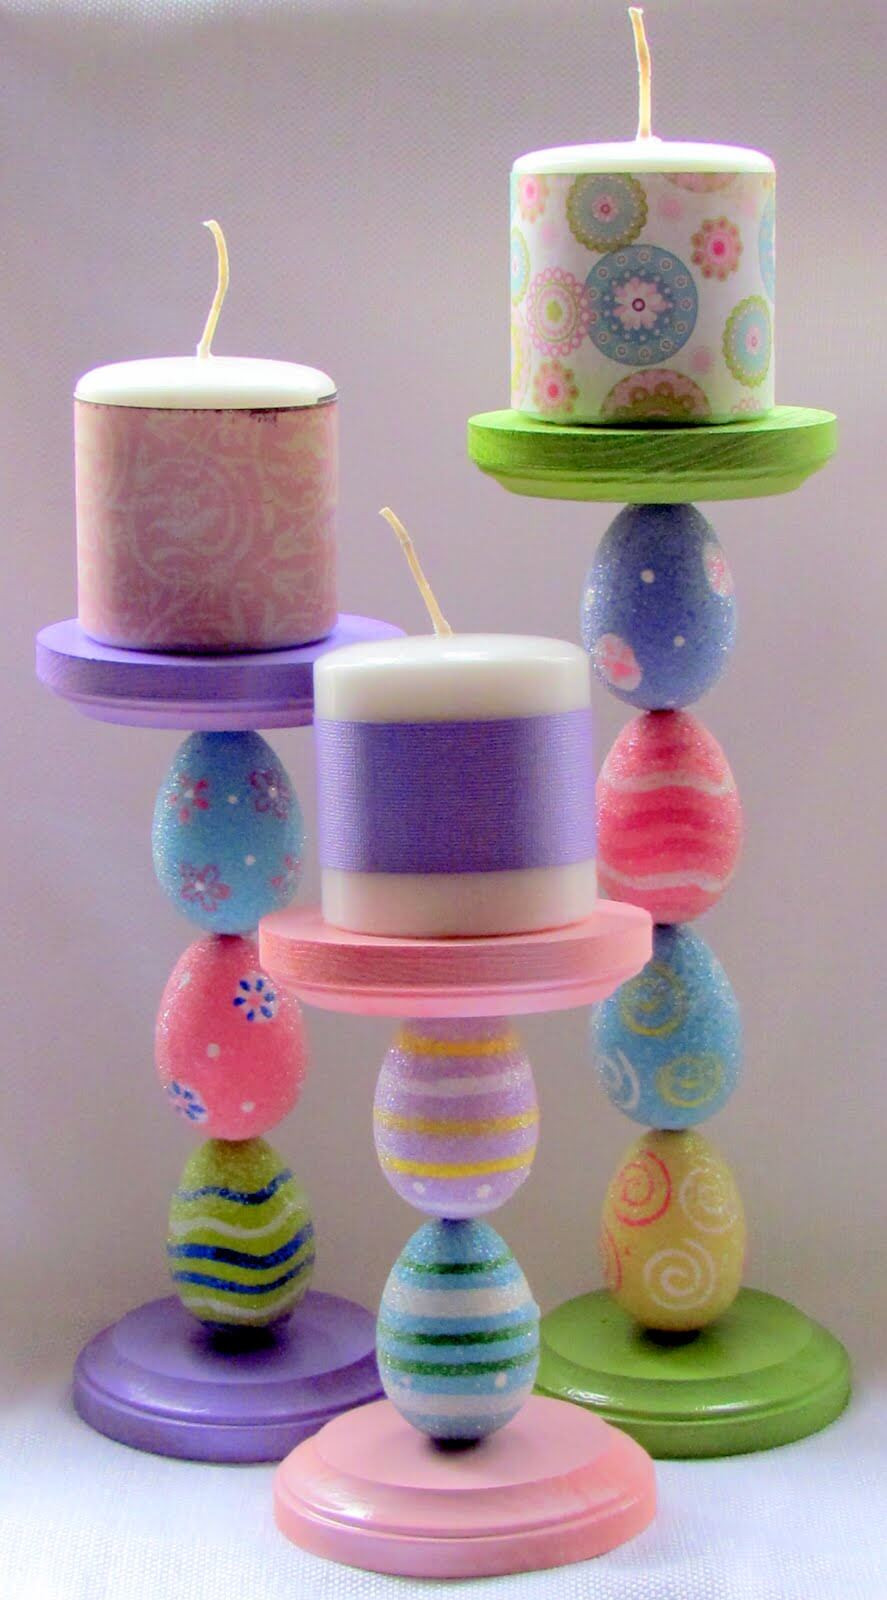 Crafts For Easter
 15 Awesome Easter Crafts To Make